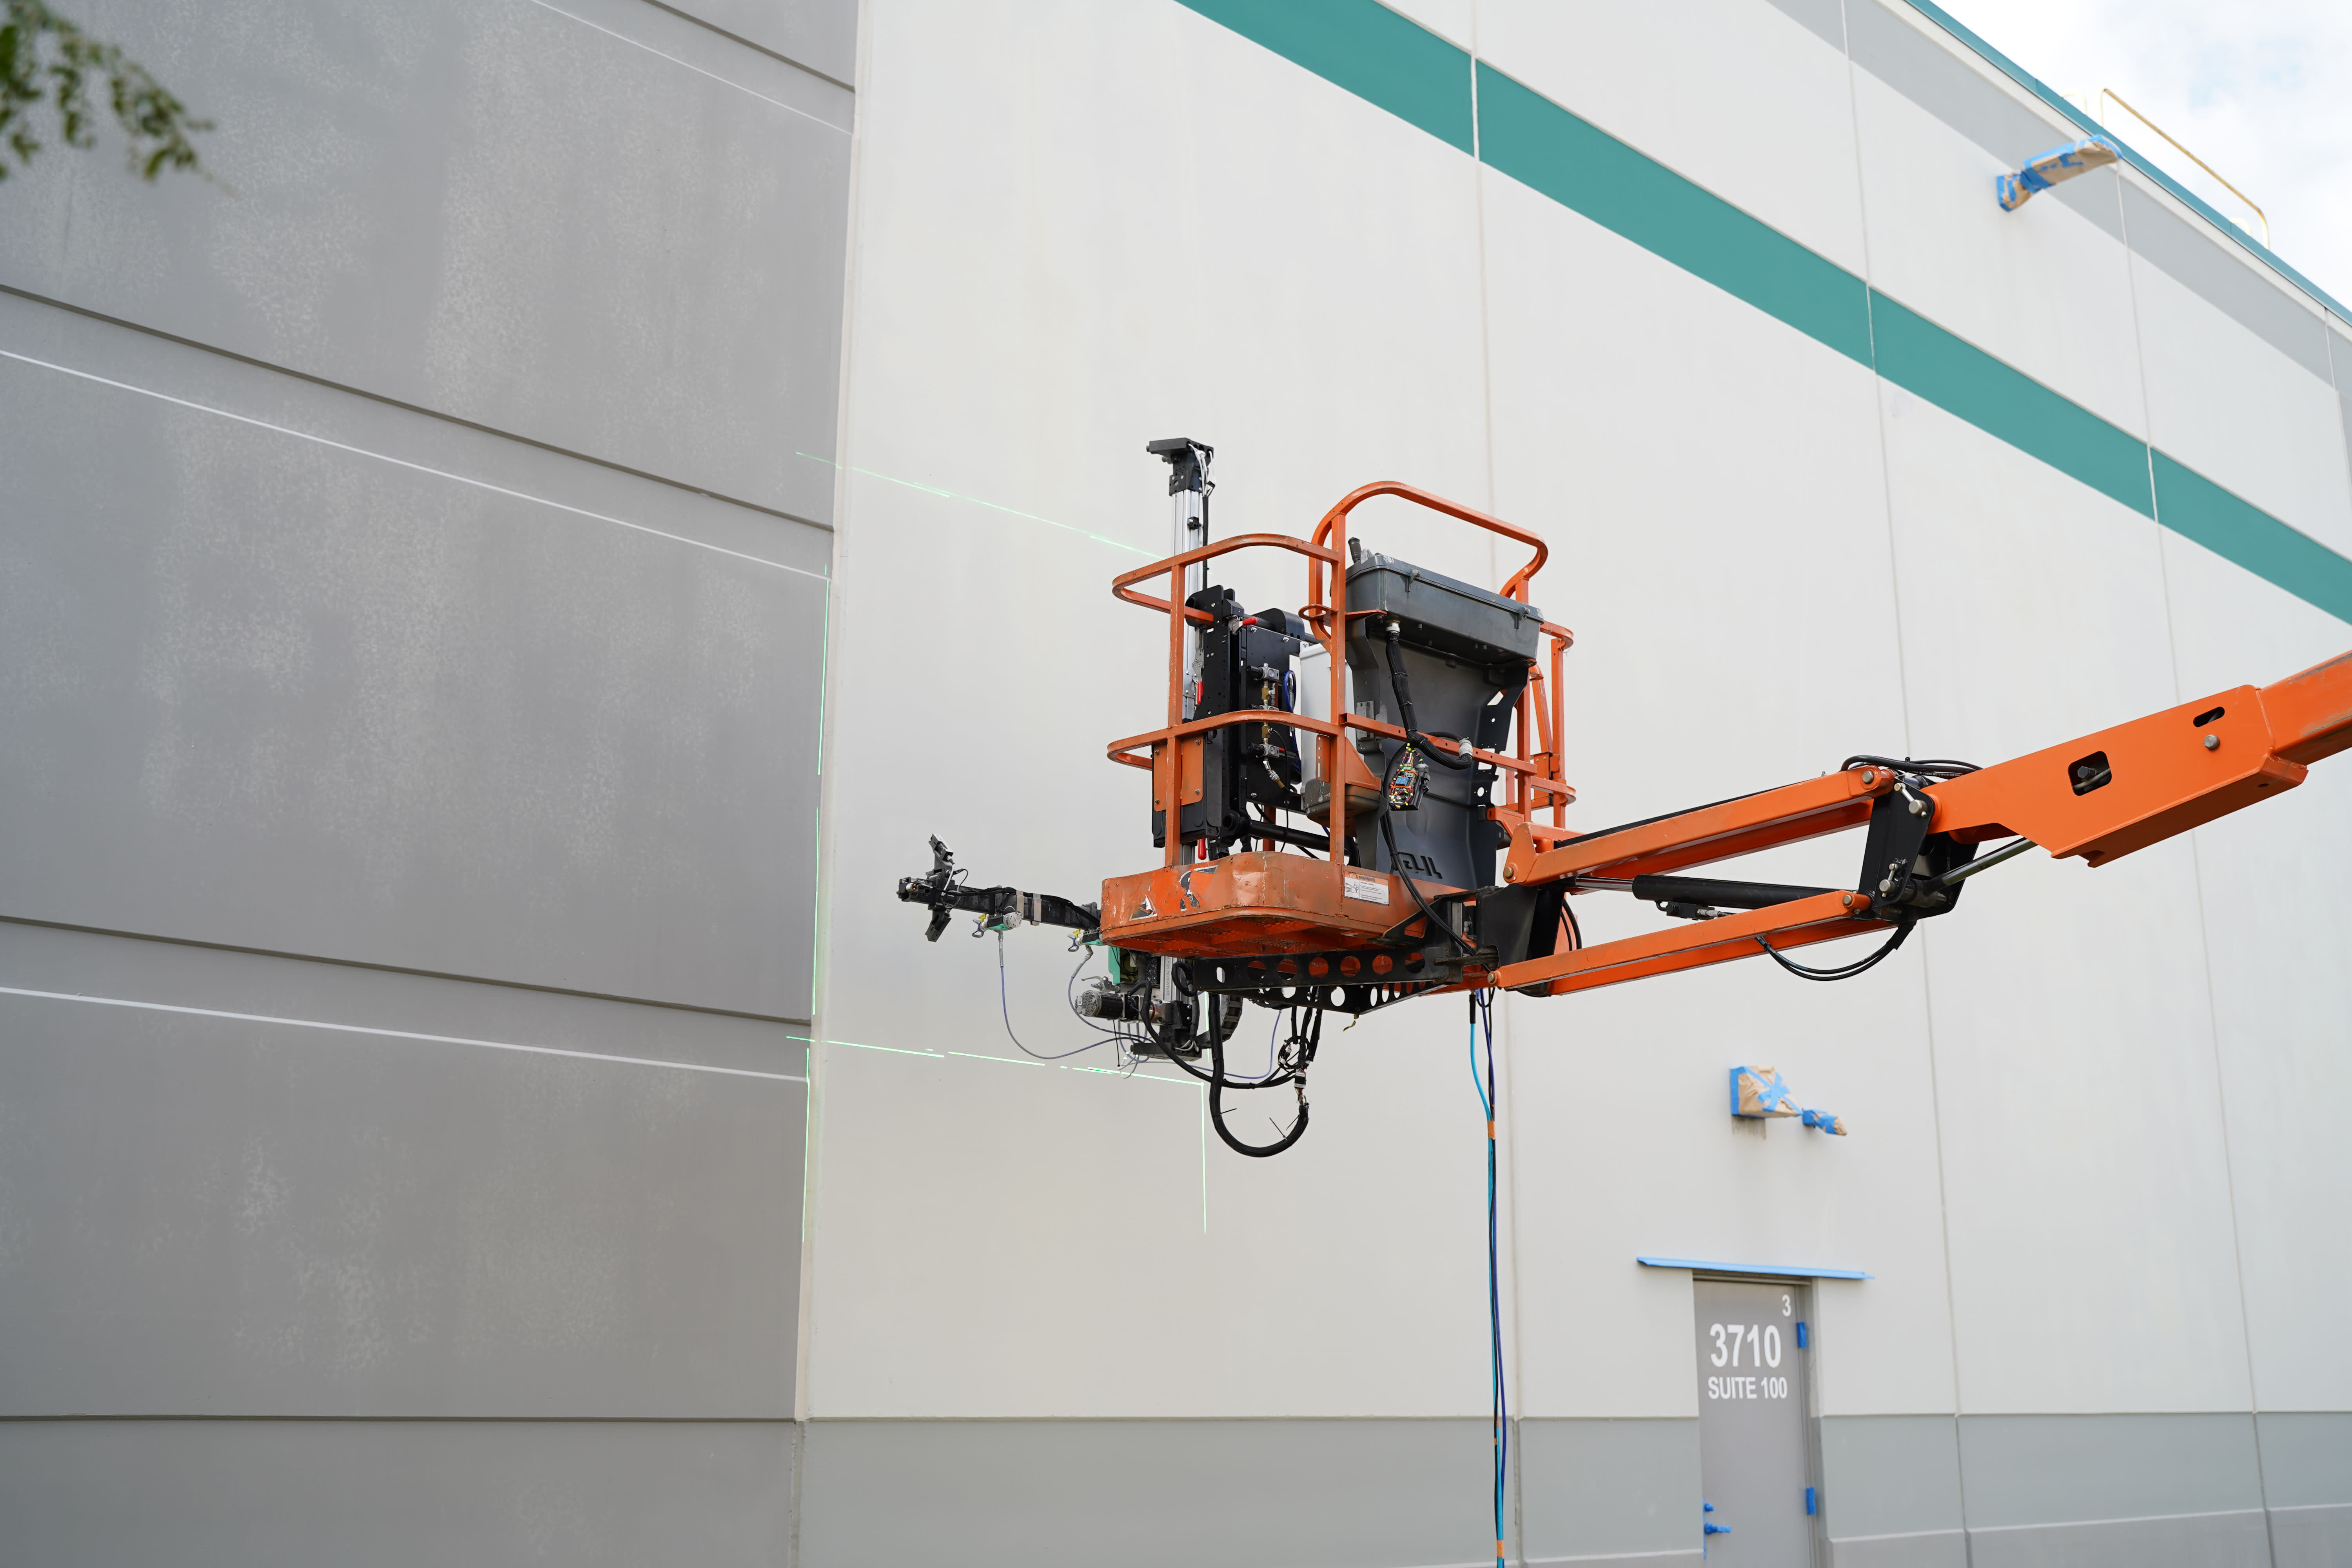 PaintJet puts robots to work in construction where labor is tight